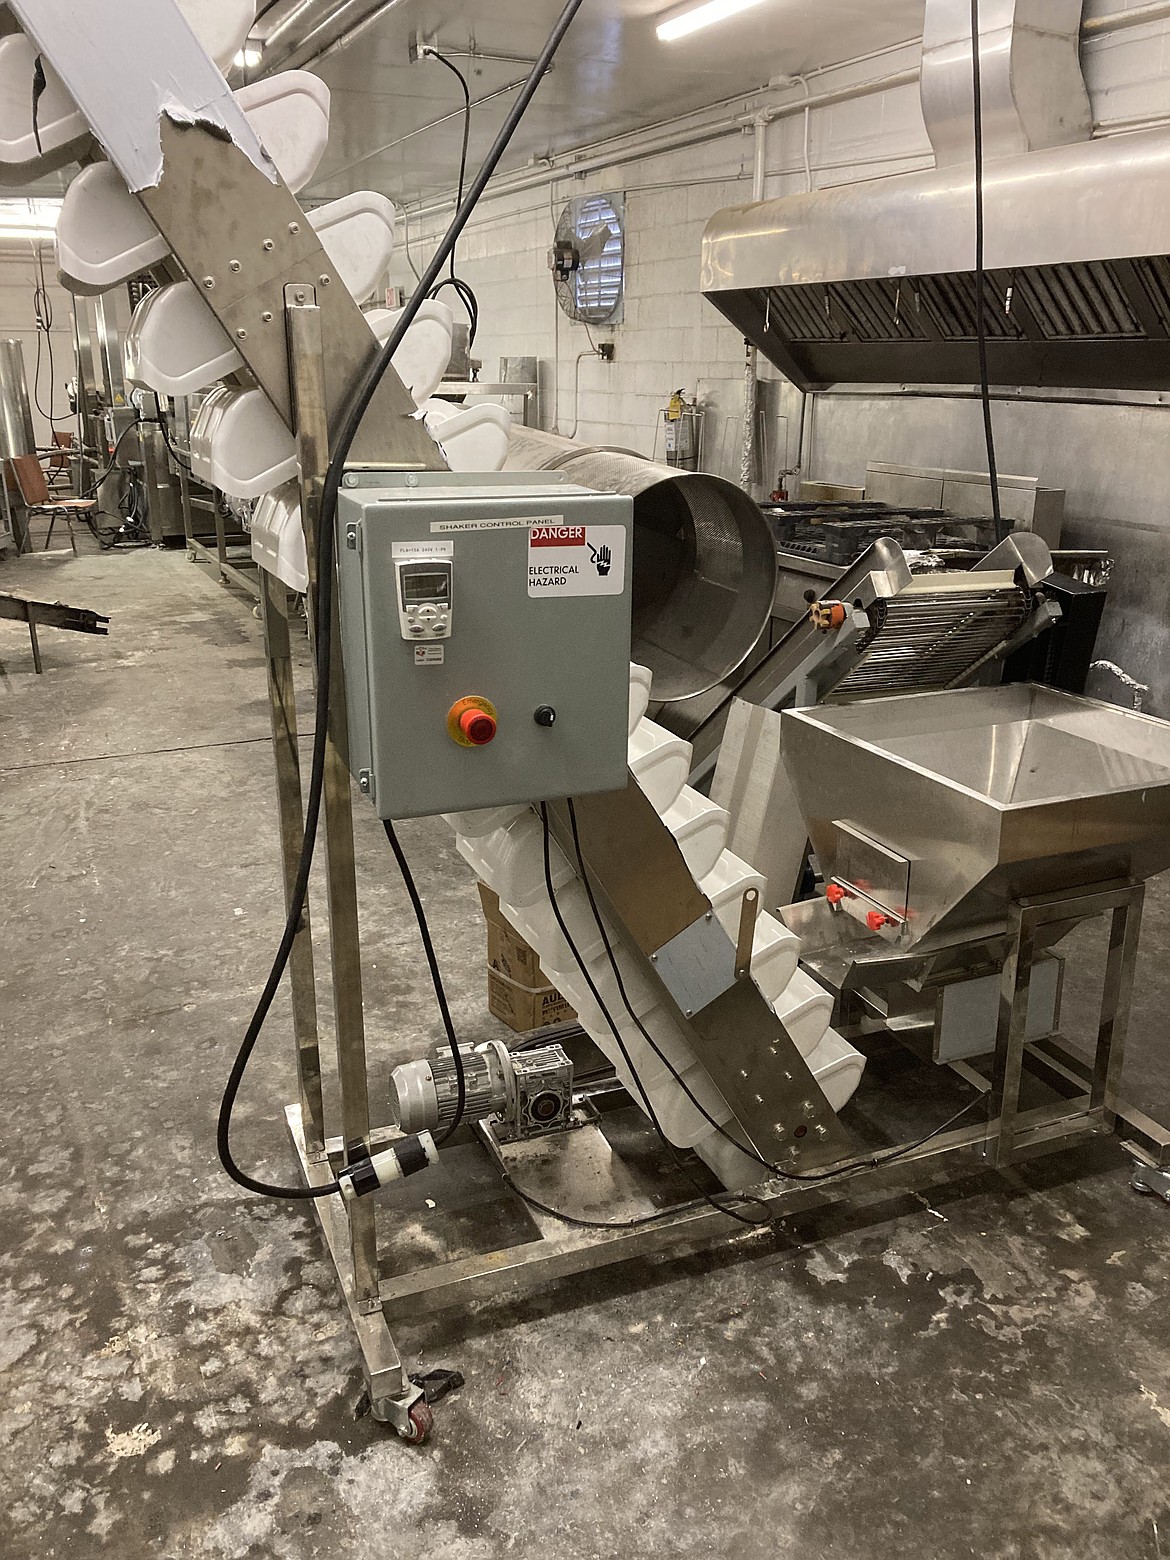 A segment of a churro manufacturing line Home Electrical Services revamped. The project took two years because the entire system had to be brought up to U.S. standards.